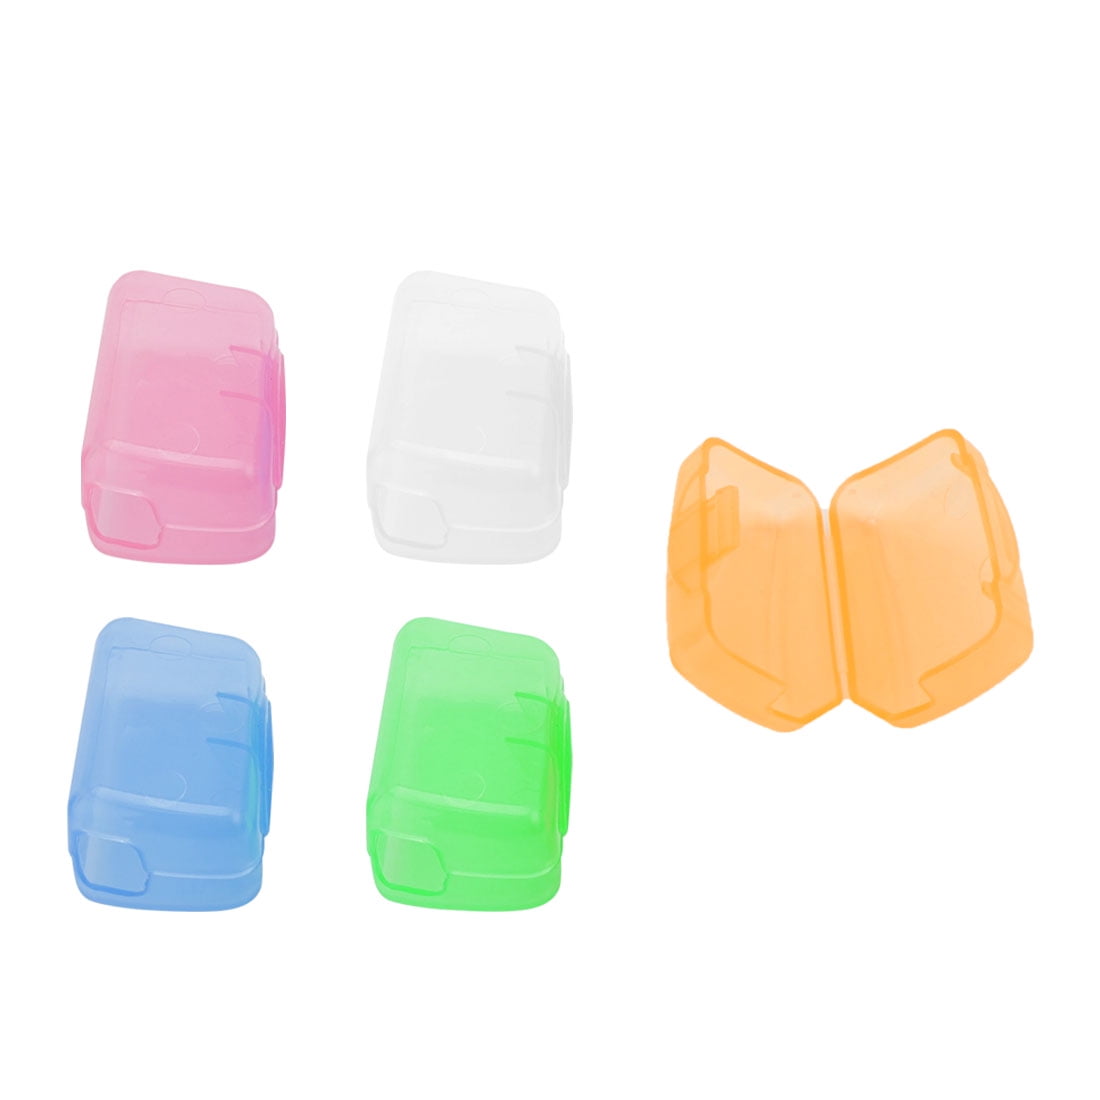 5Pcs Toothbrush Head Cover Case Cap Useful Travel Hike Camping Brush Protector 